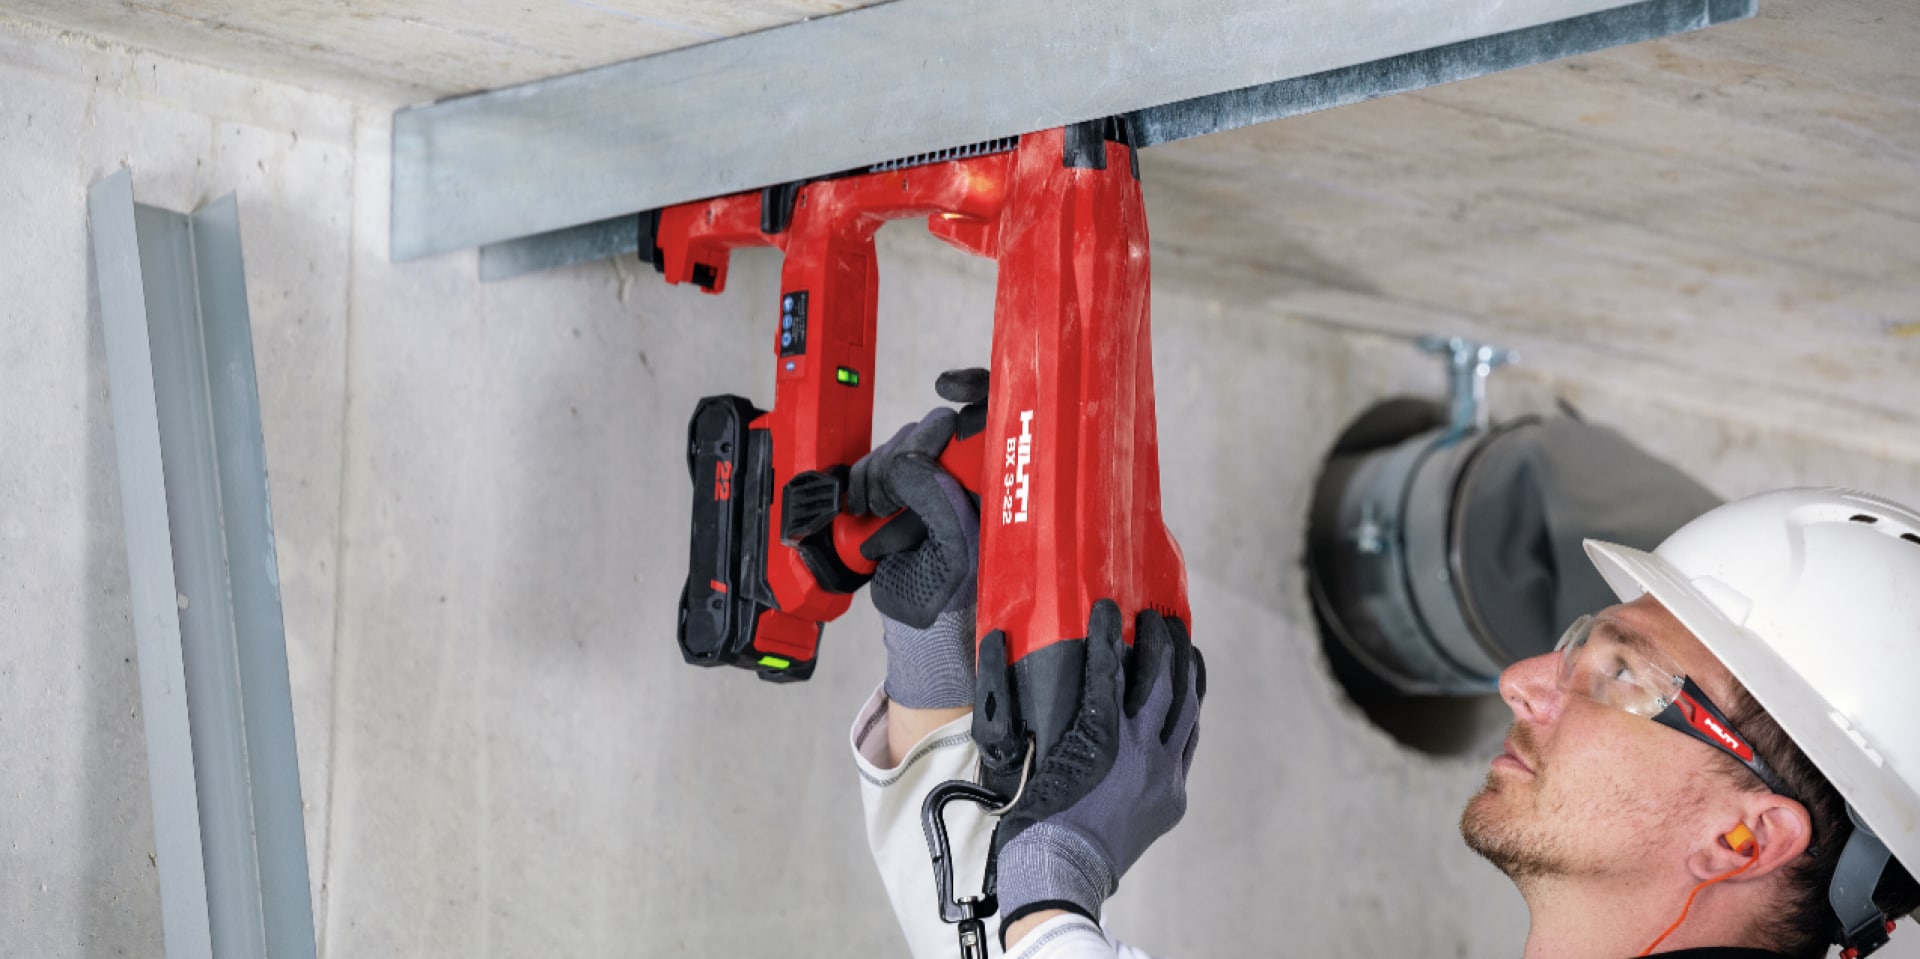 BX 3 battery-powered nailer, a virtually dust-free alternative to drilling, being used to fasten on concrete